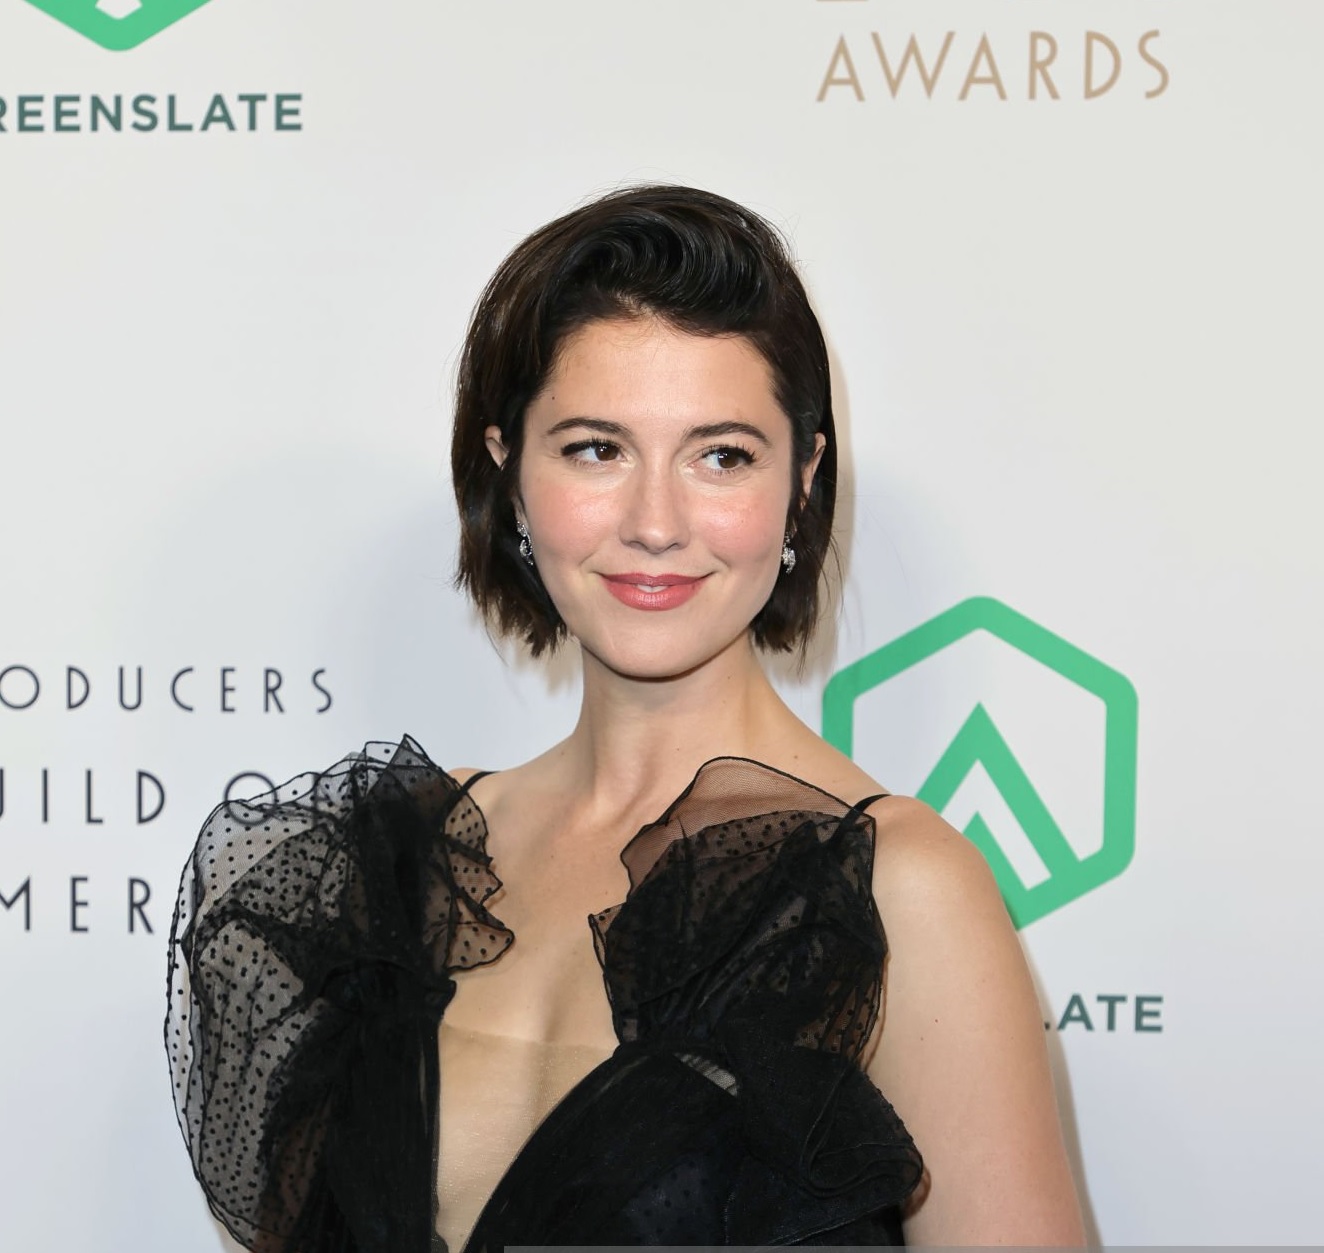 Mary Elizabeth Winstead attended the 33rd Annual Producers Guild Awards on March 19, 2022